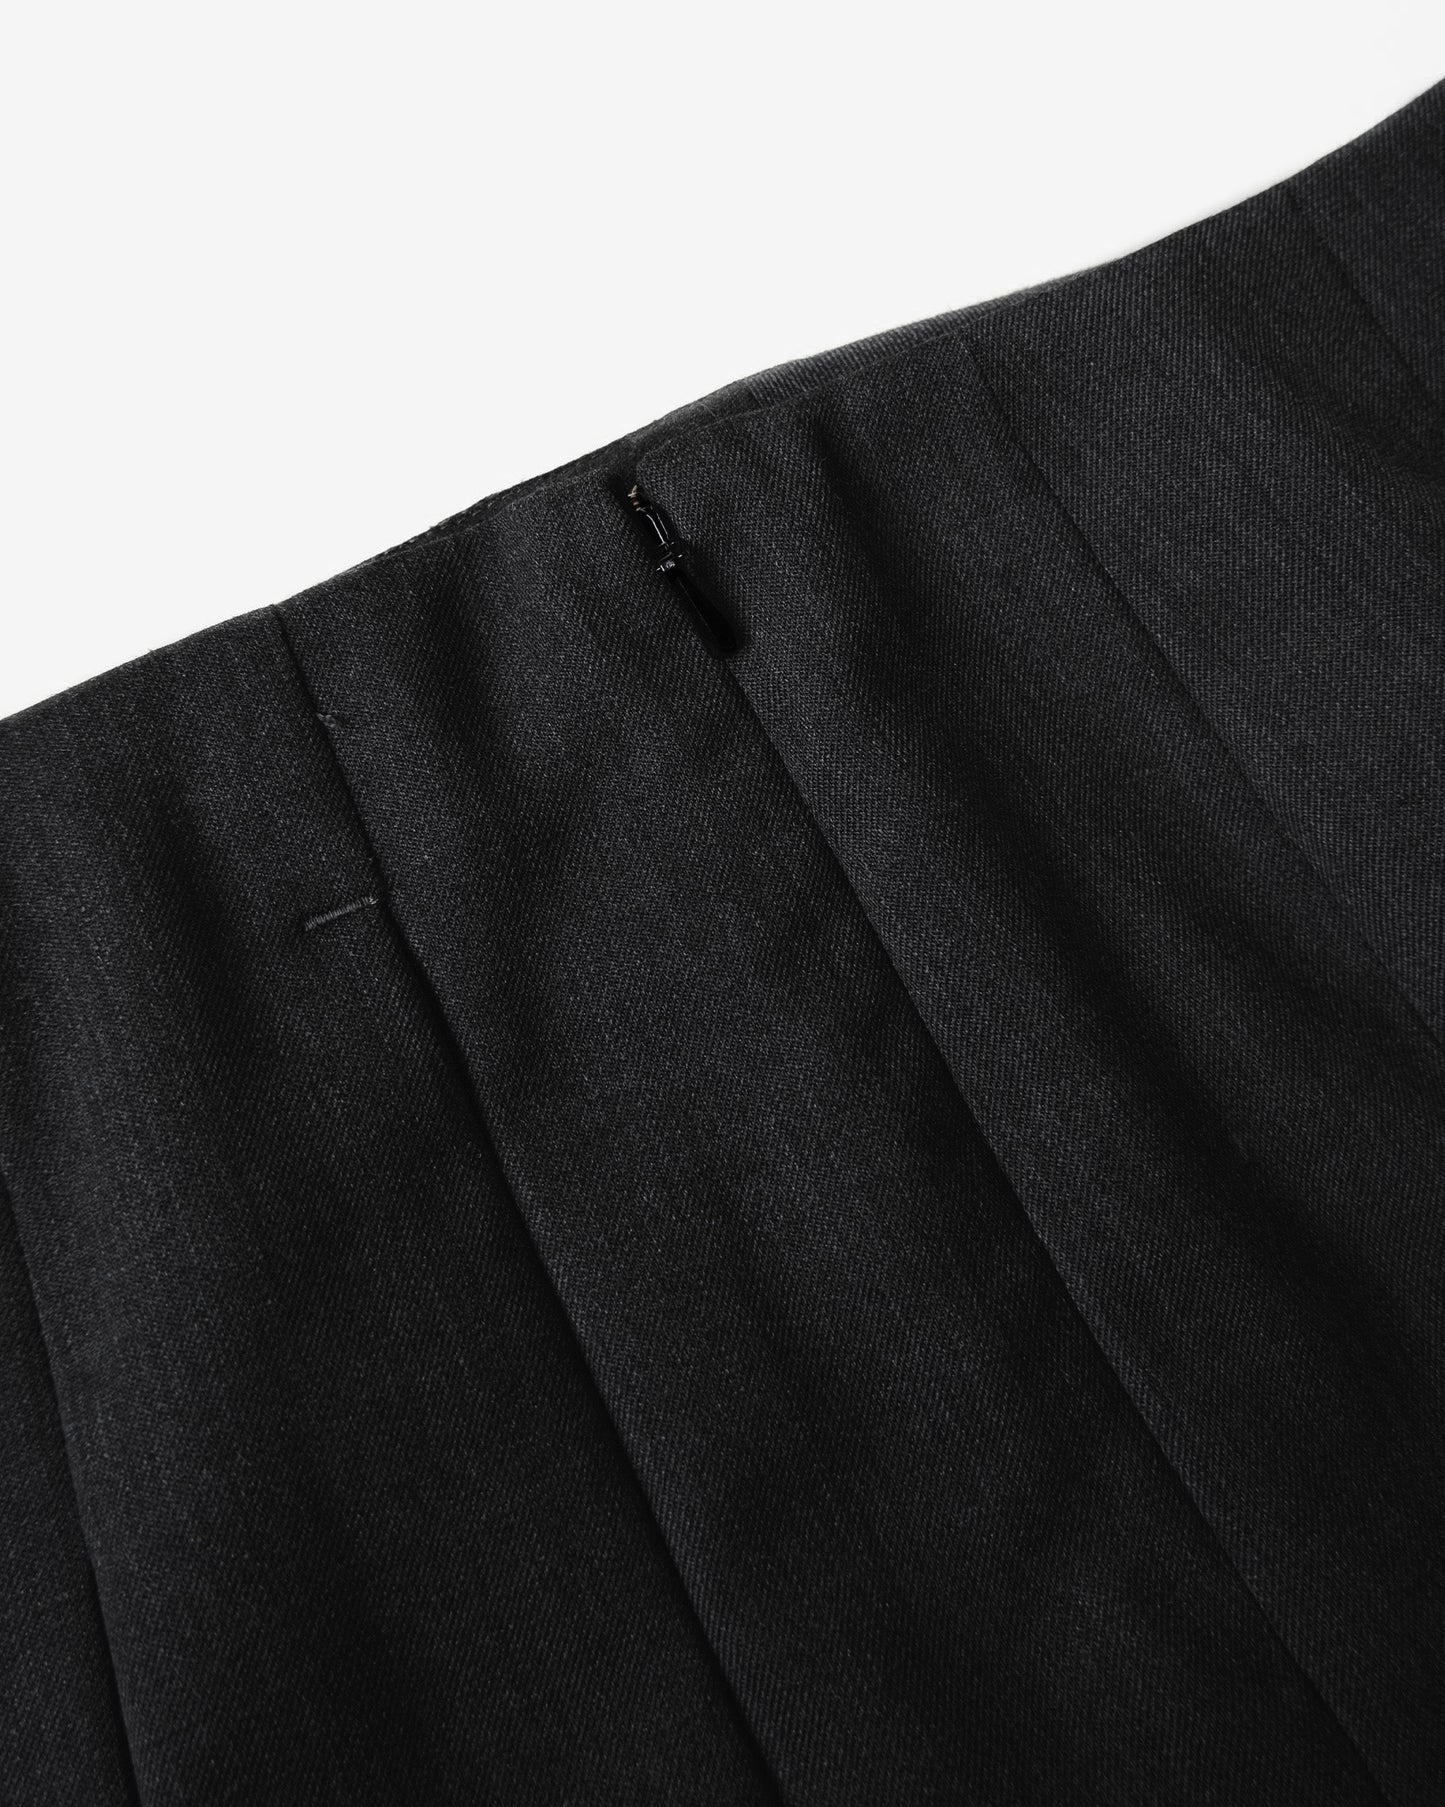 Angels Factory Pleated Skirt by 404 - Black